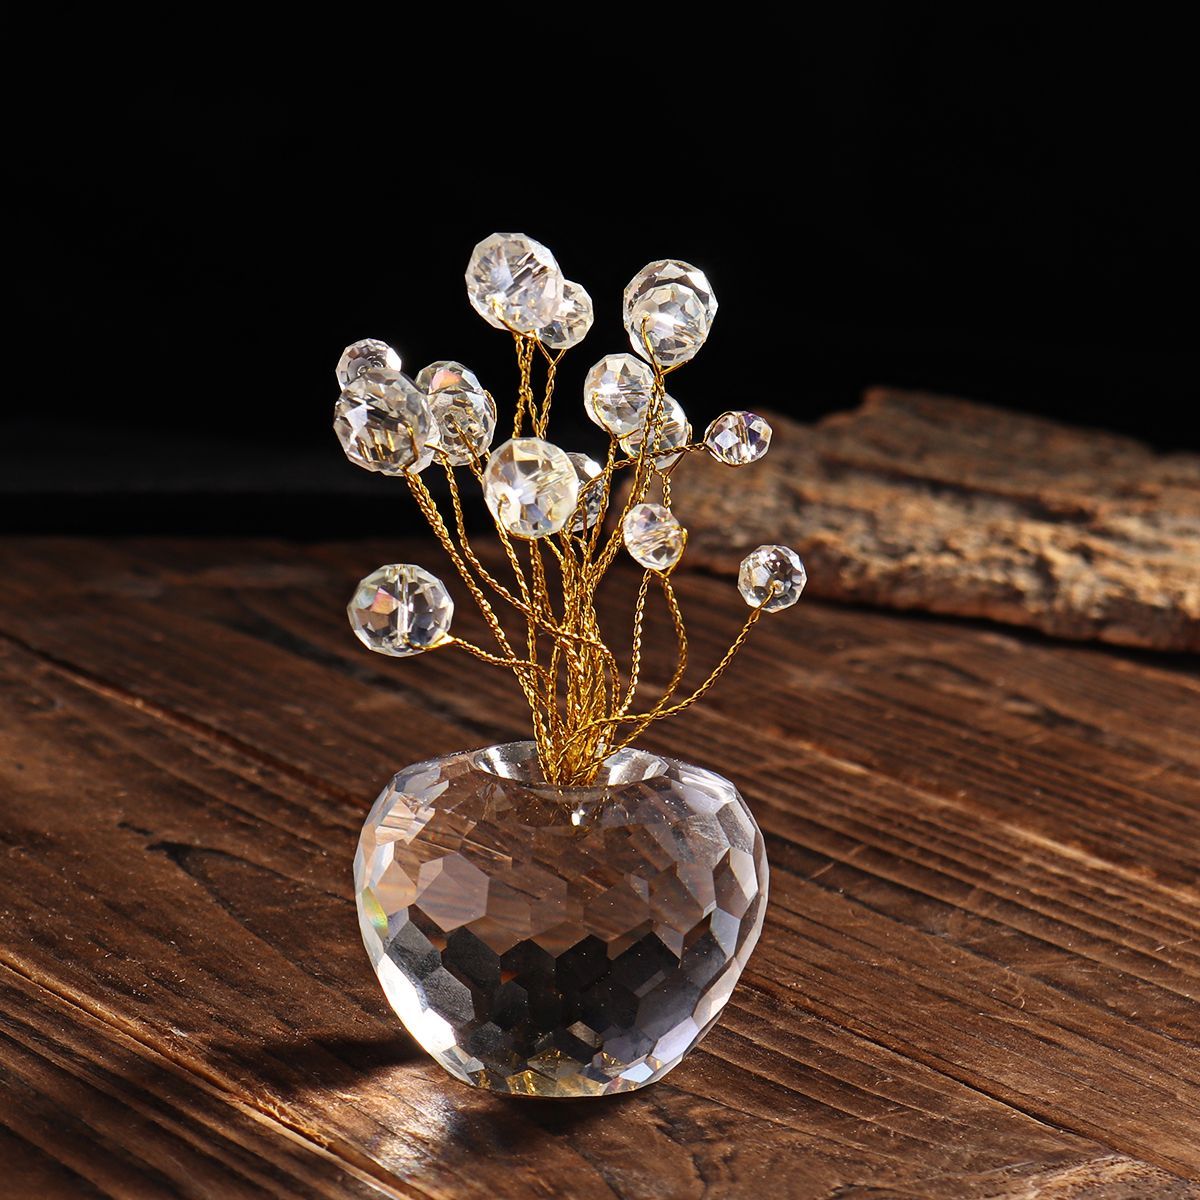 10cm-3D-Crystal-Apple-Model-Glass-Craft-Table-Top-Home-Ornaments-Decoration-1736366